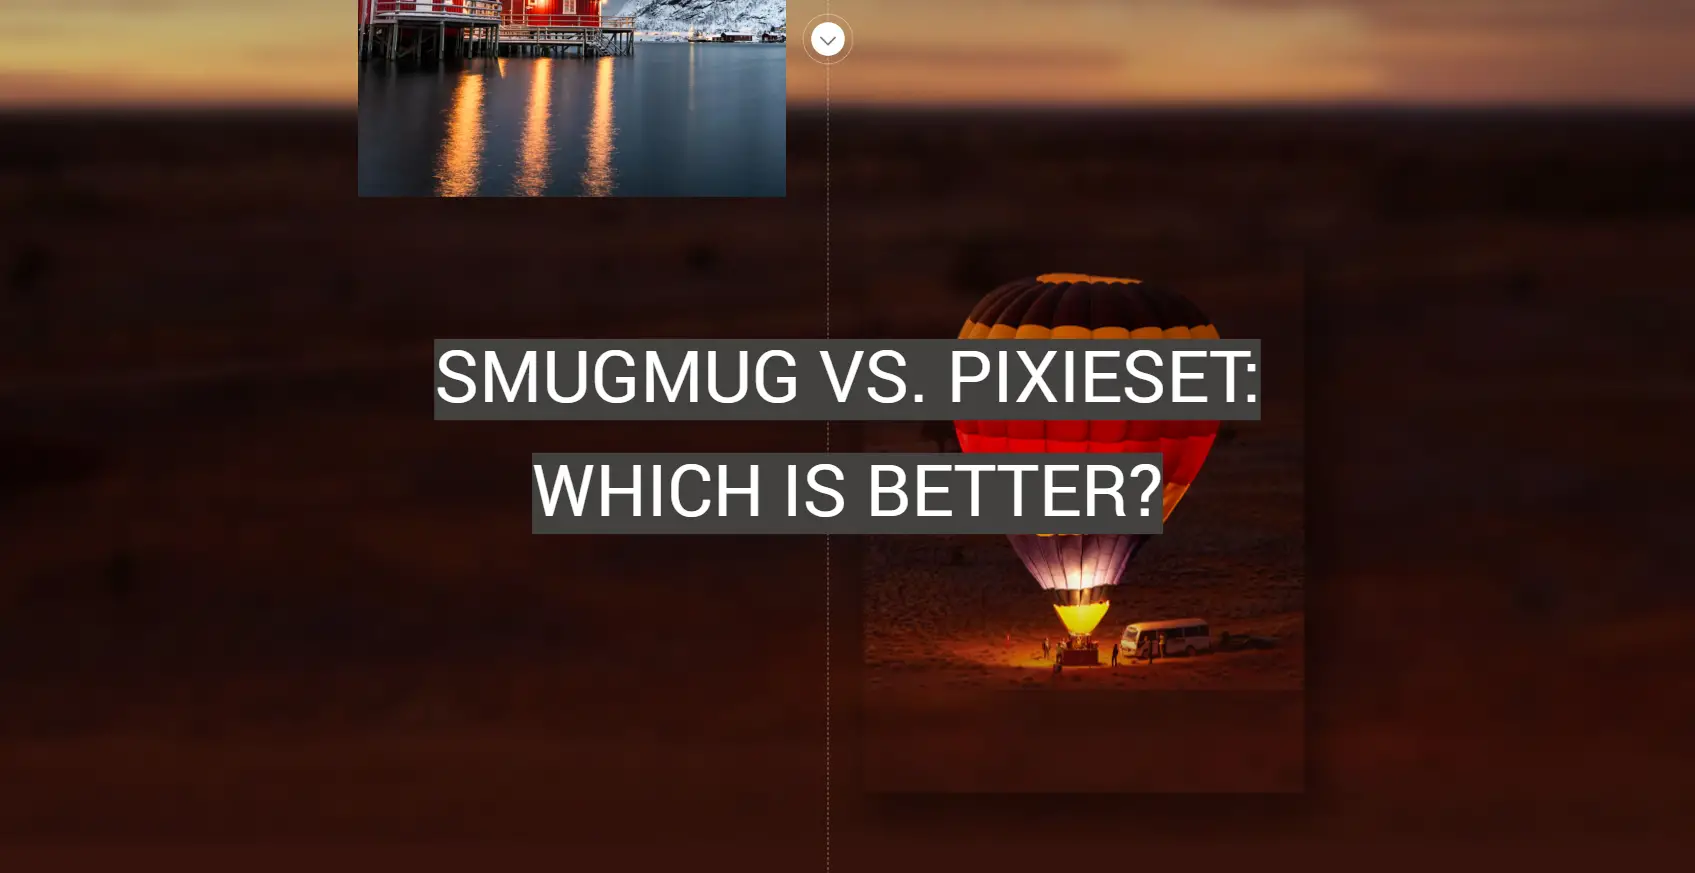 SmugMug vs. Pixieset: Which is Better?